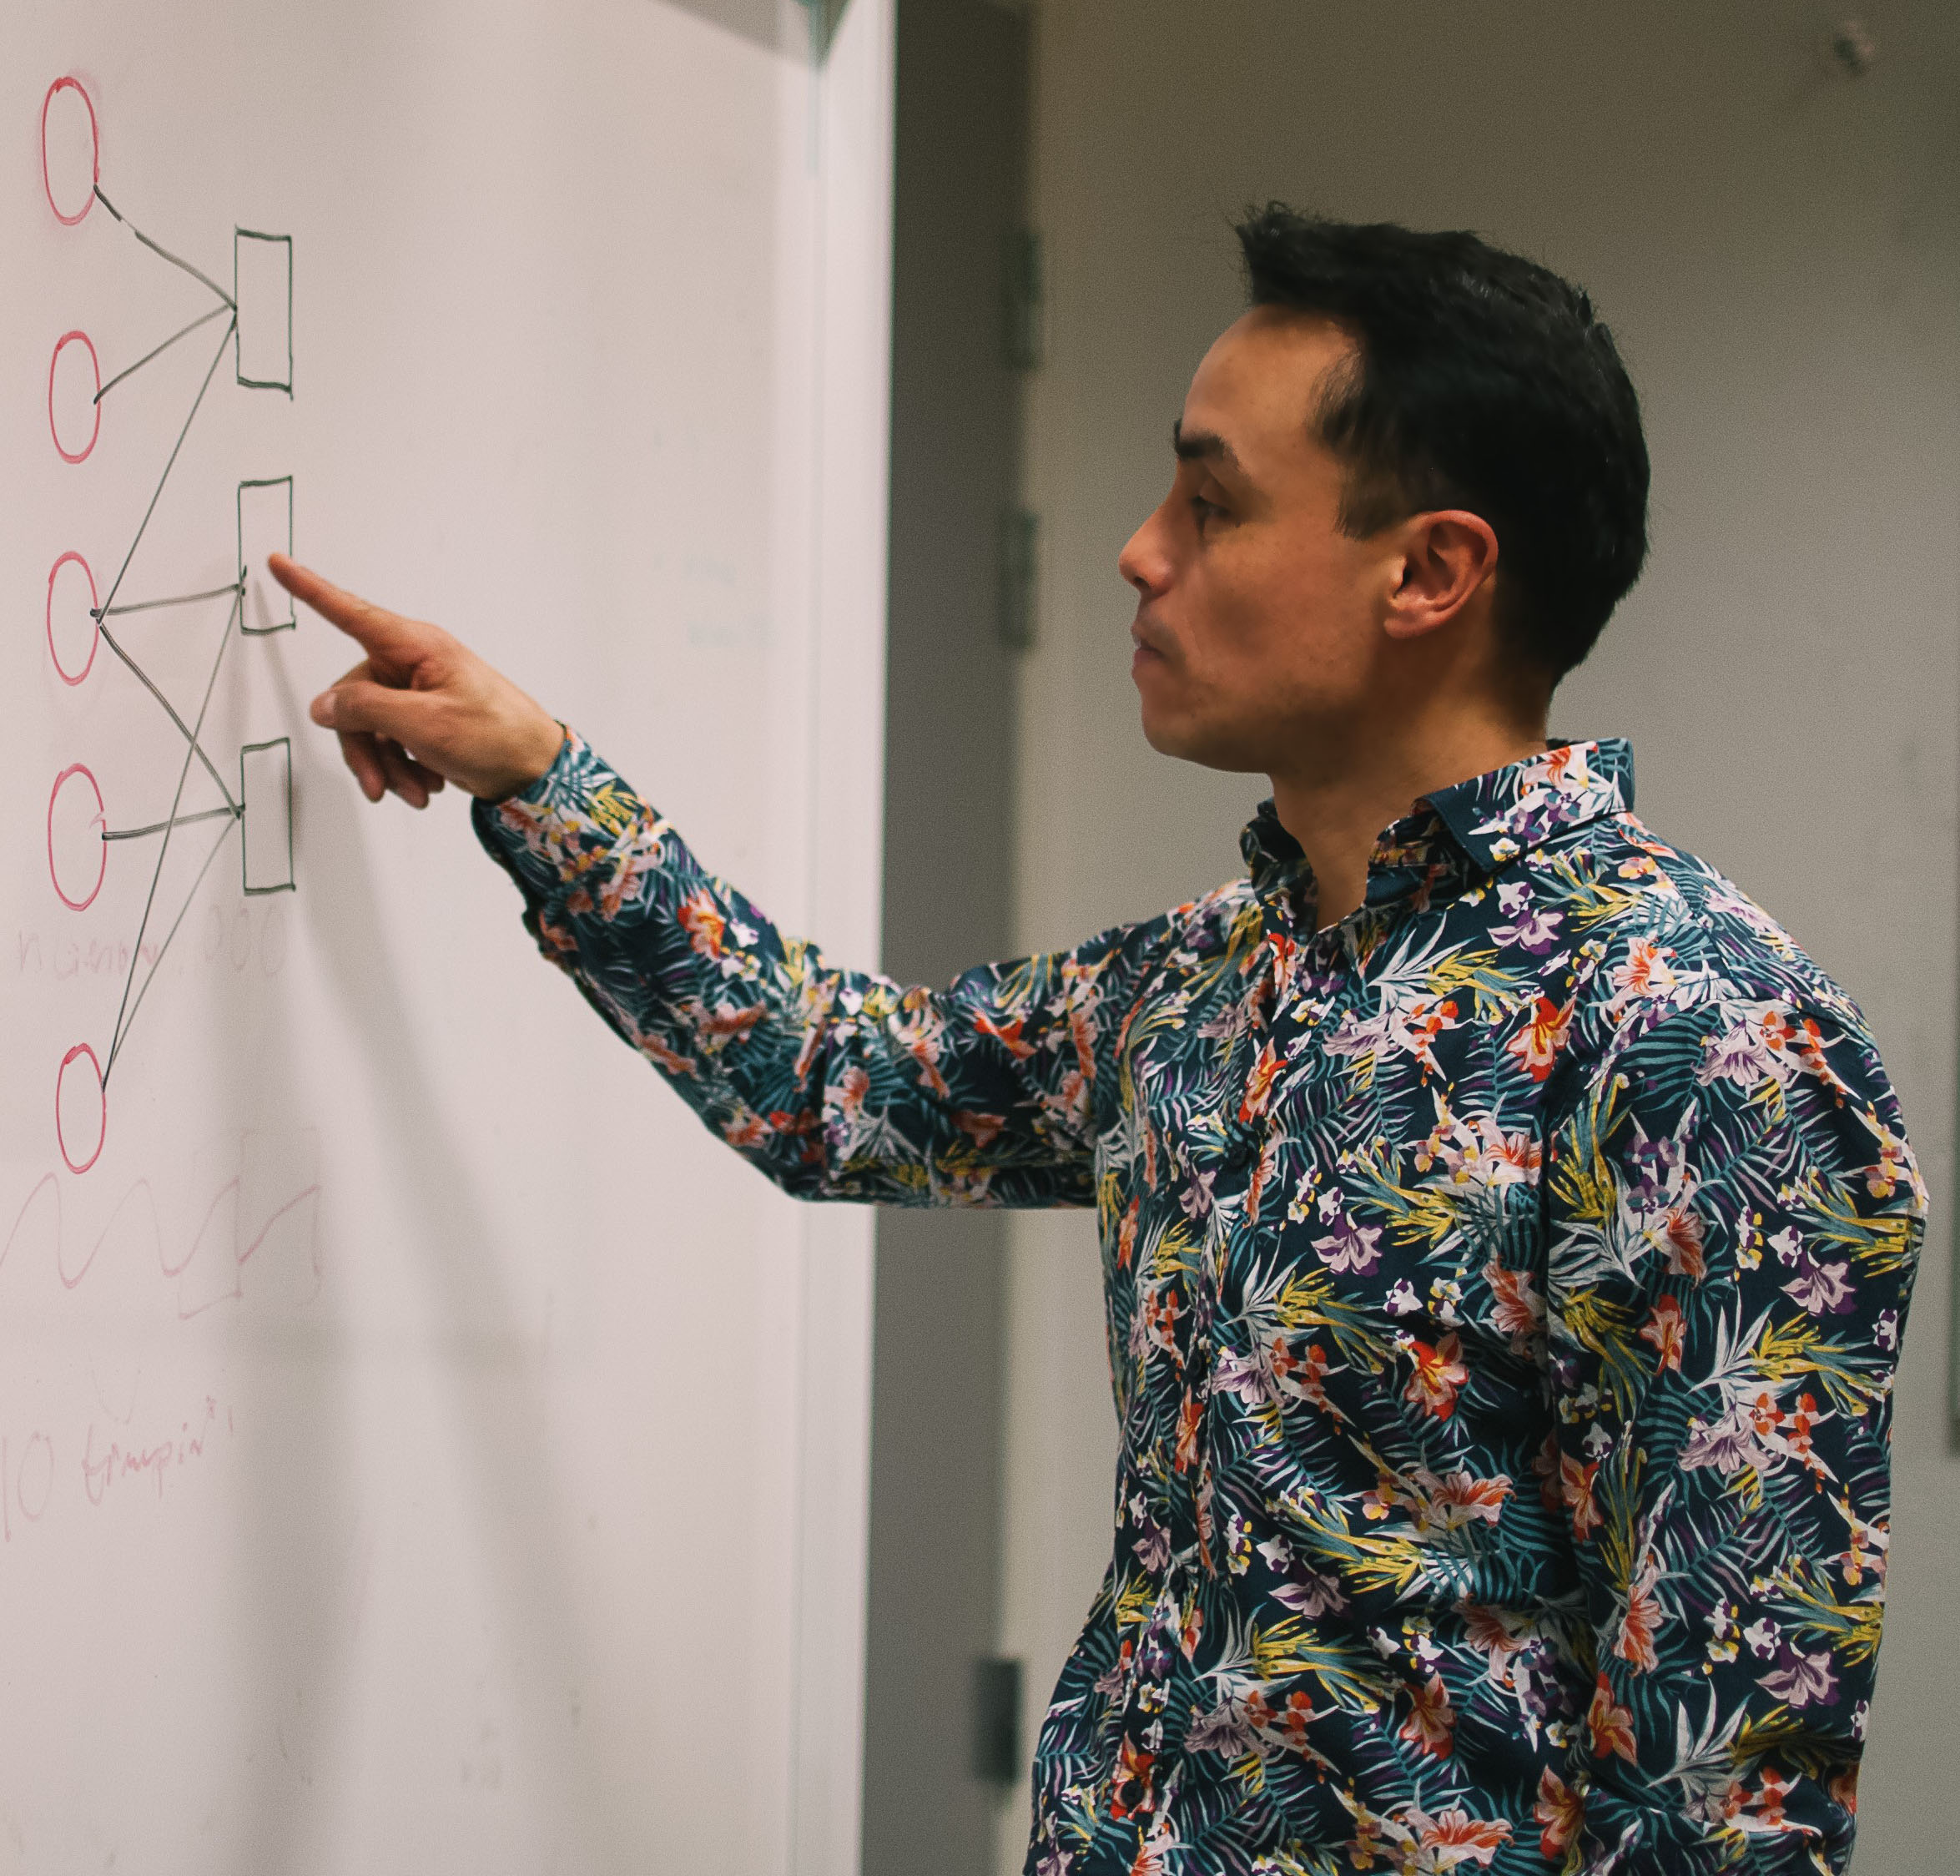 A person looks at a network figure on a white board